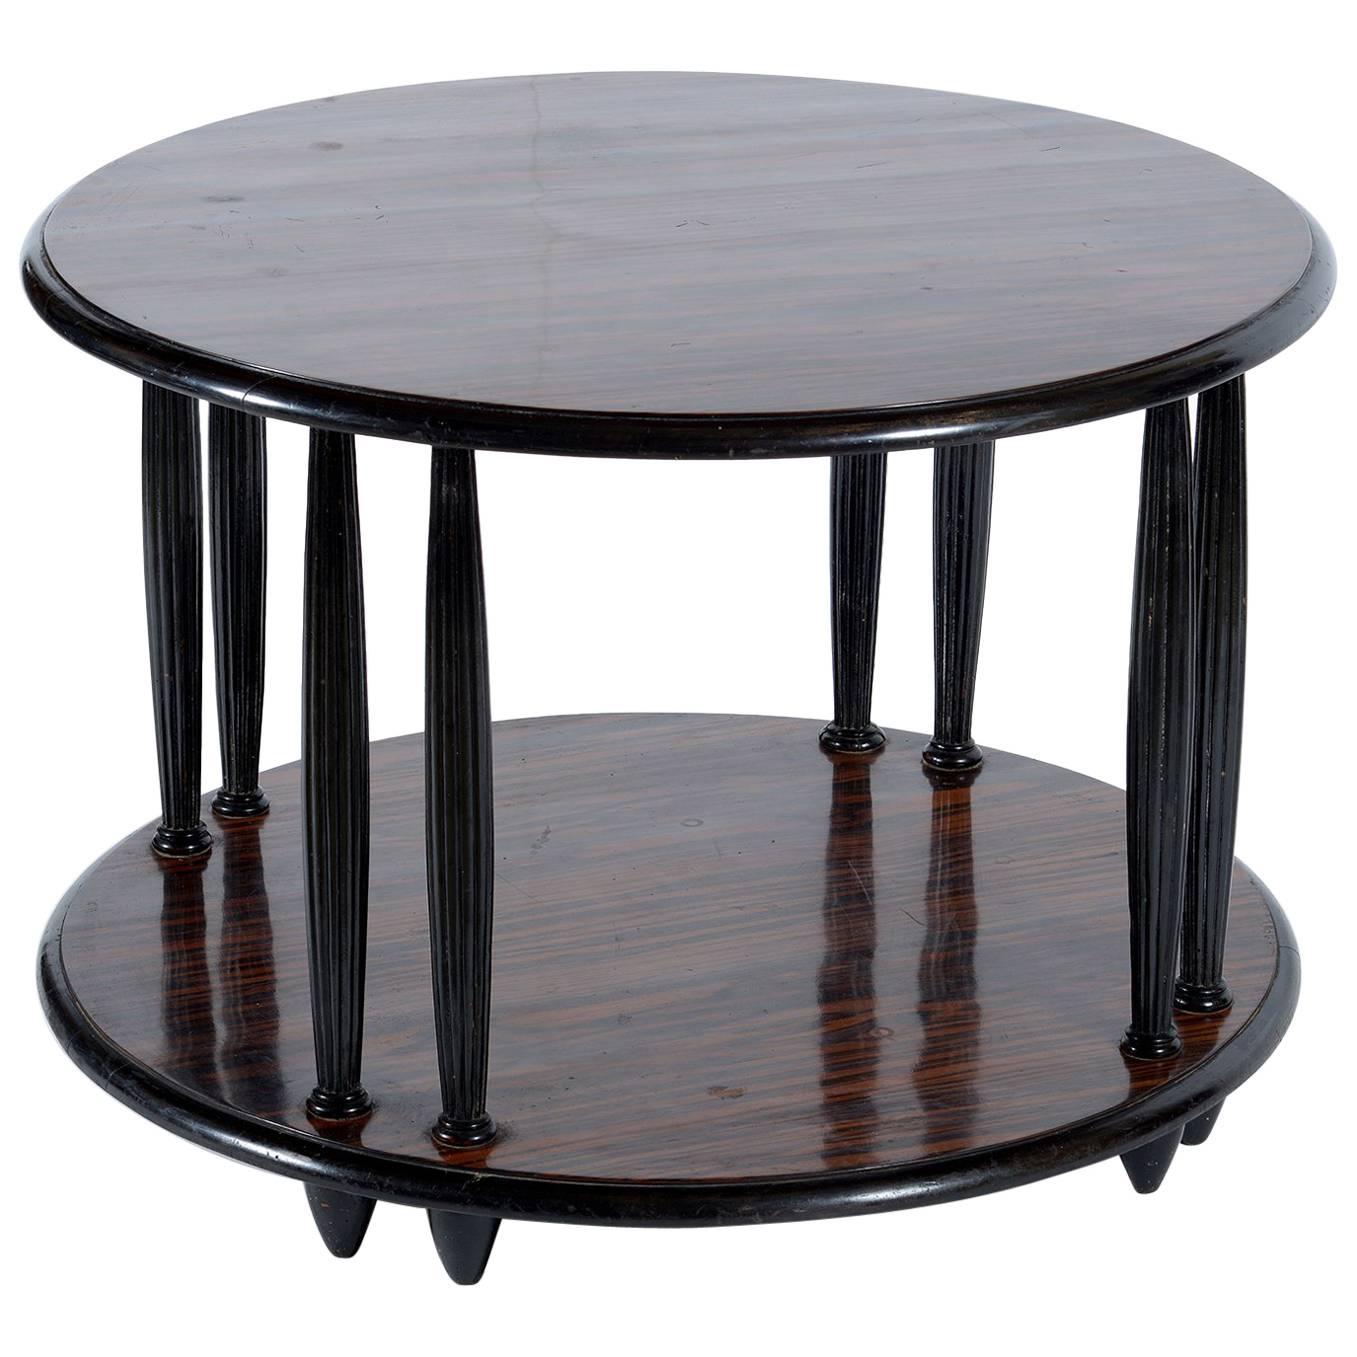 Round  Double Shelves Art Deco Coffee or Side Table, 1925-1930